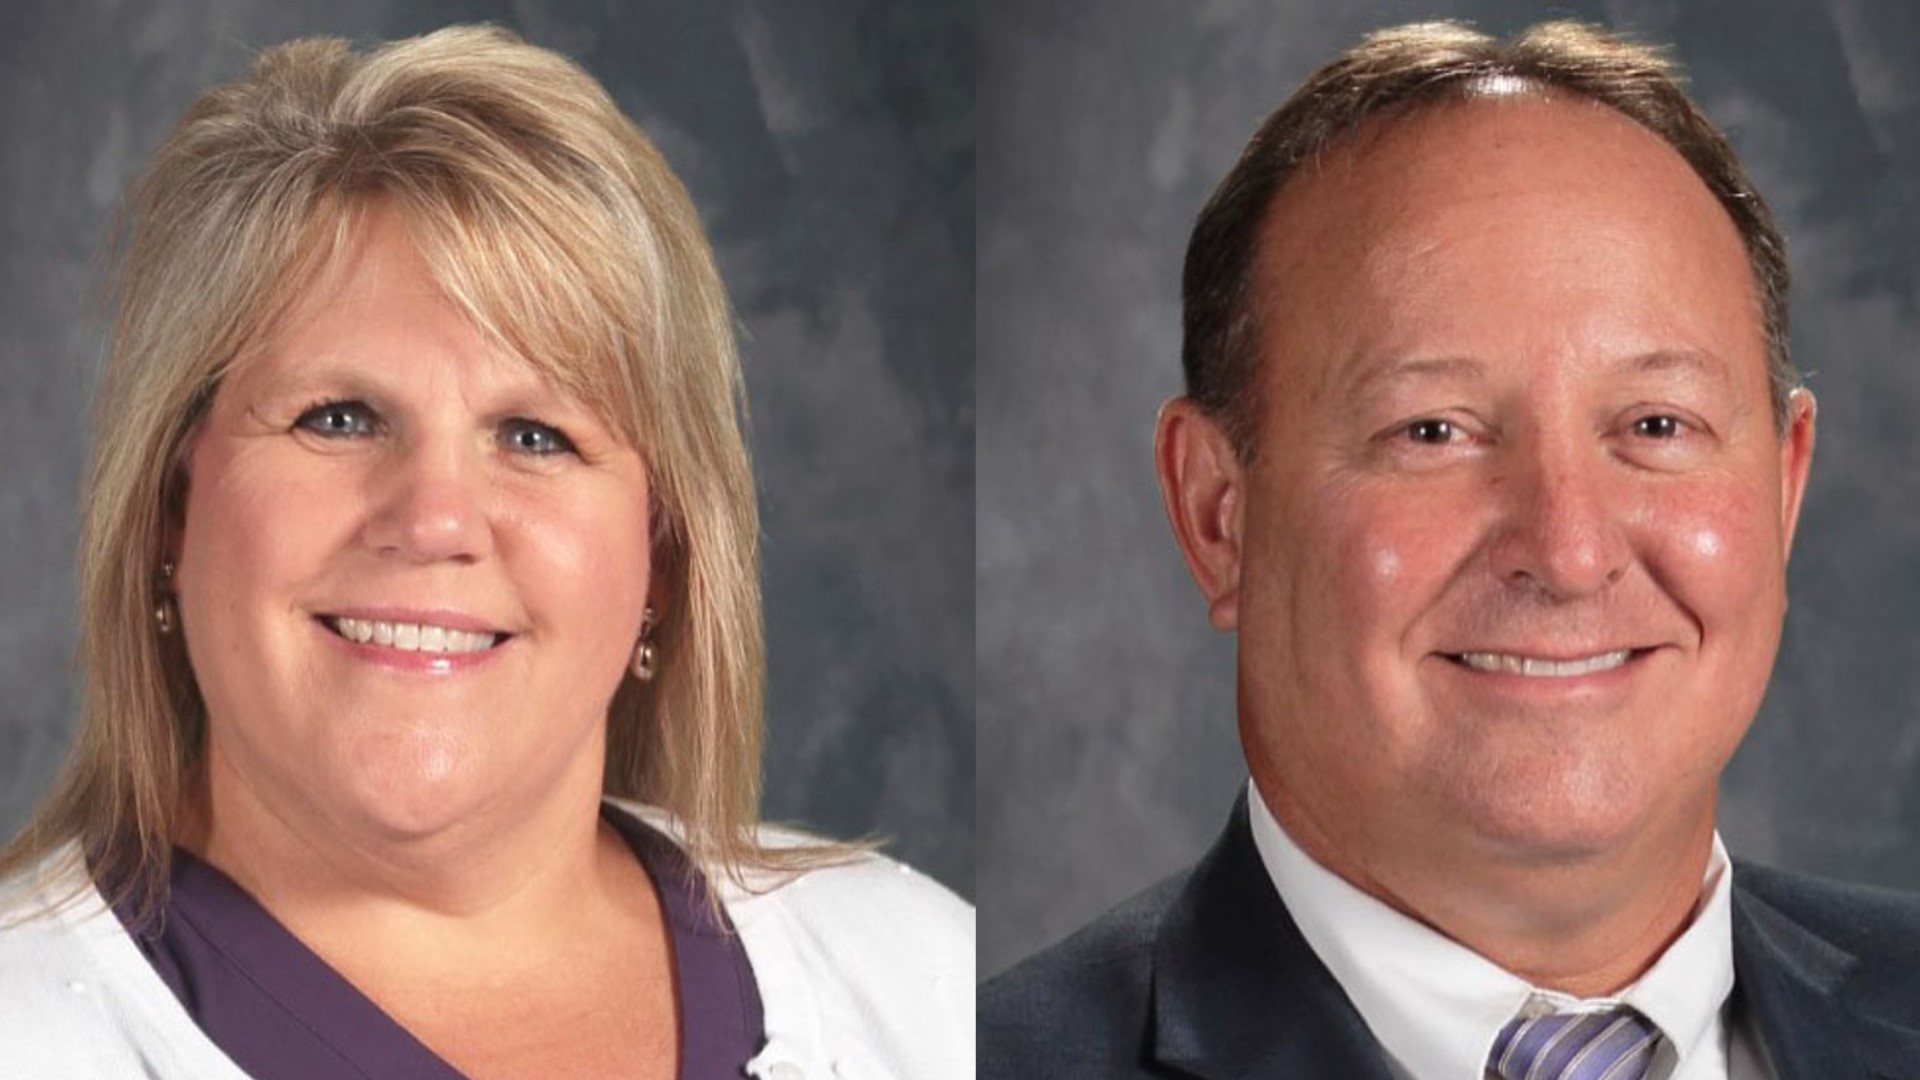 The district announced the principals were both placed on administrative leave pending an investigation into “non-related complaints” involving each principal.